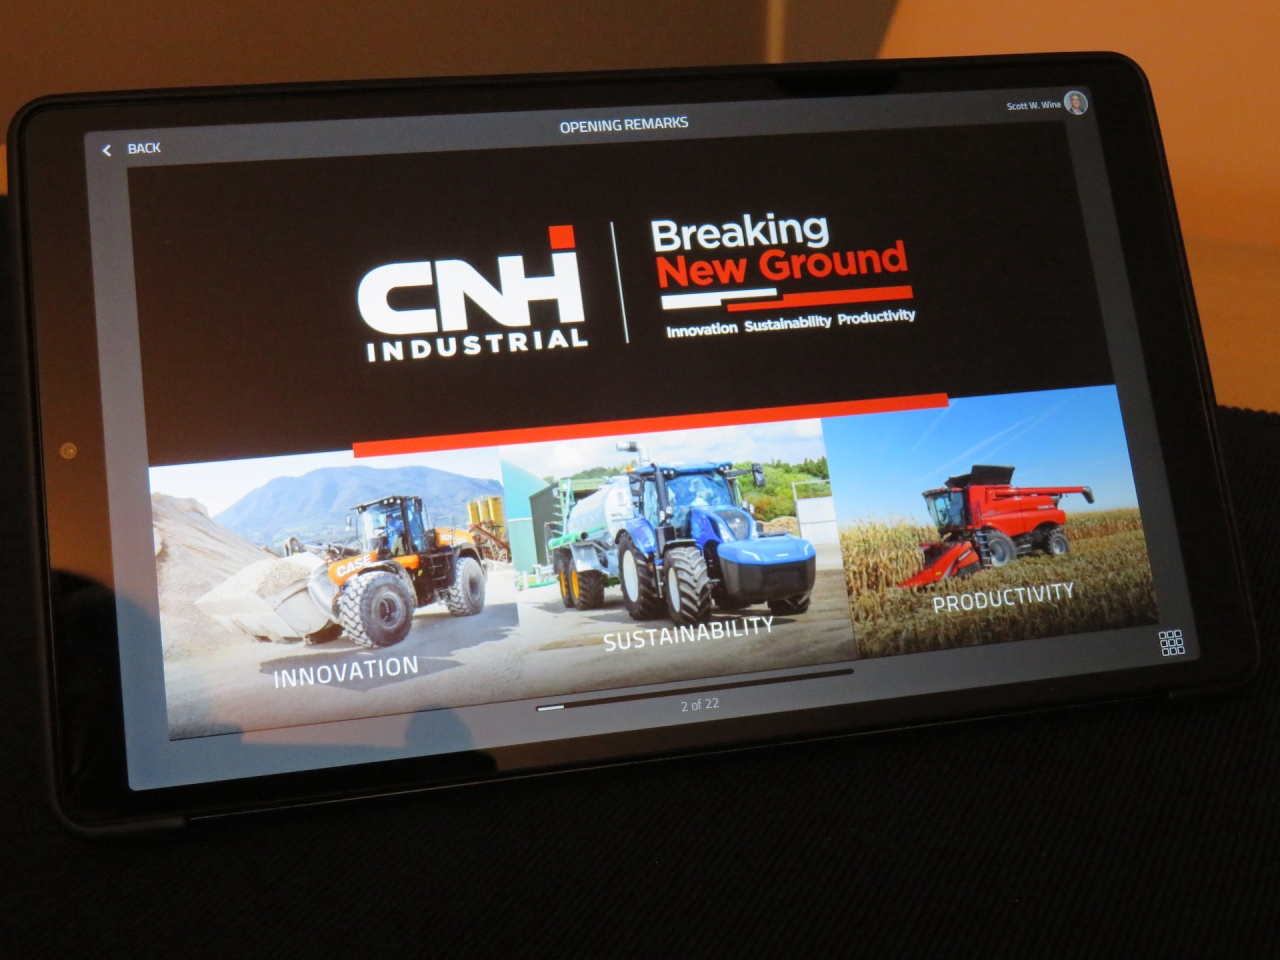 table reading "CNH Industrial Breaking New Ground" with images of tractors